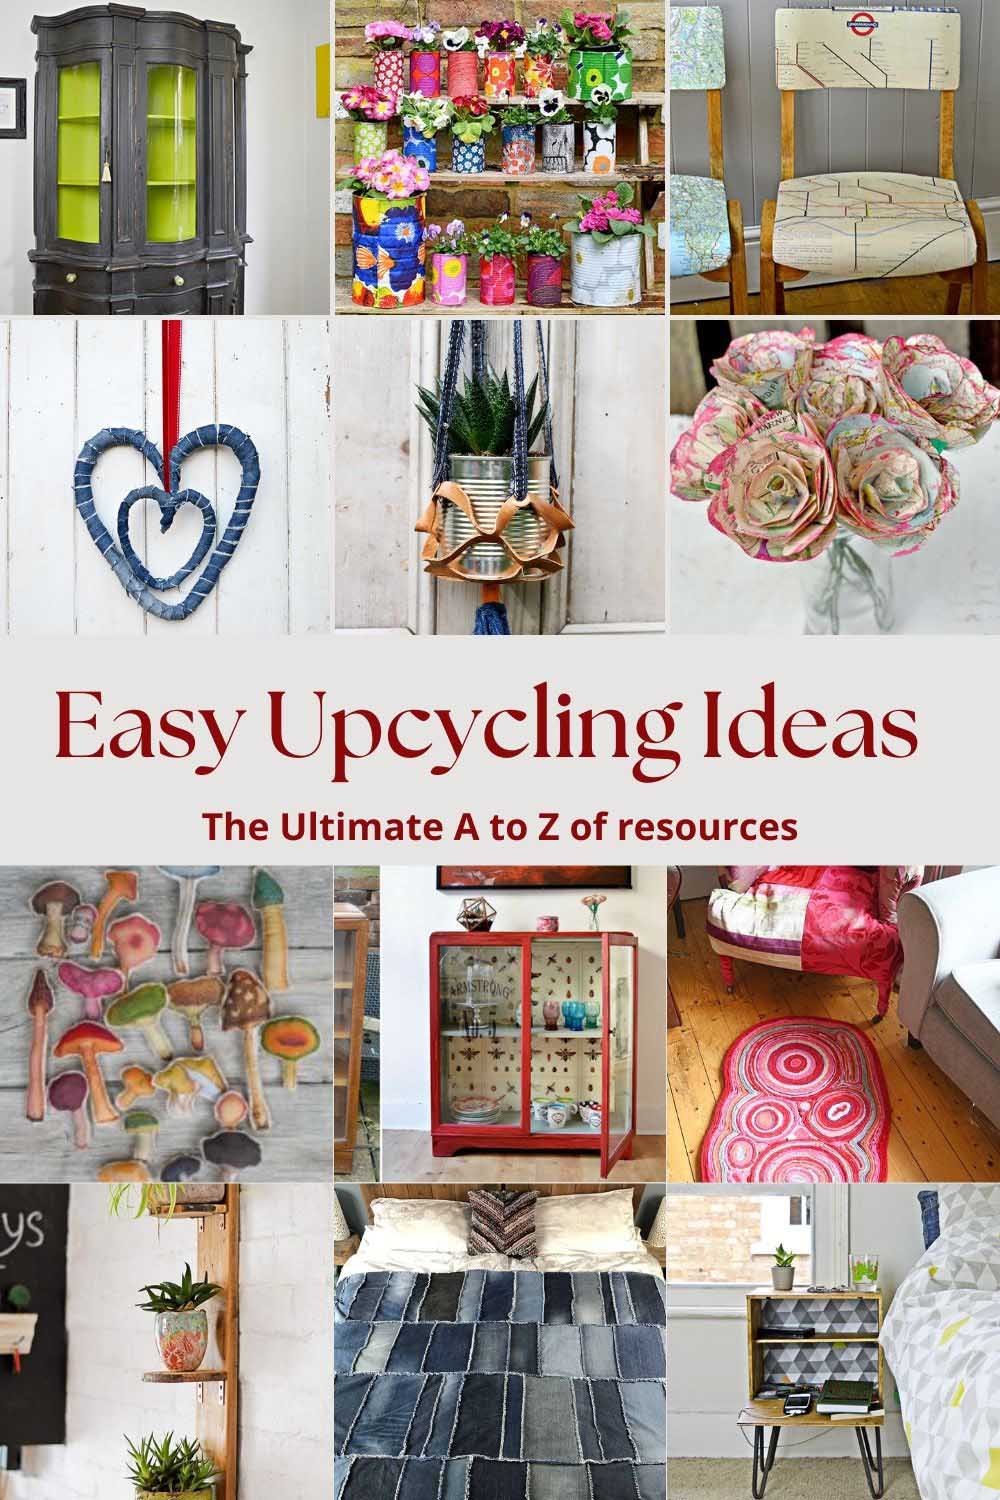 Easy upcycling ideas pin includes pictures of many upcycled crafts from furniture to tin cans and denim